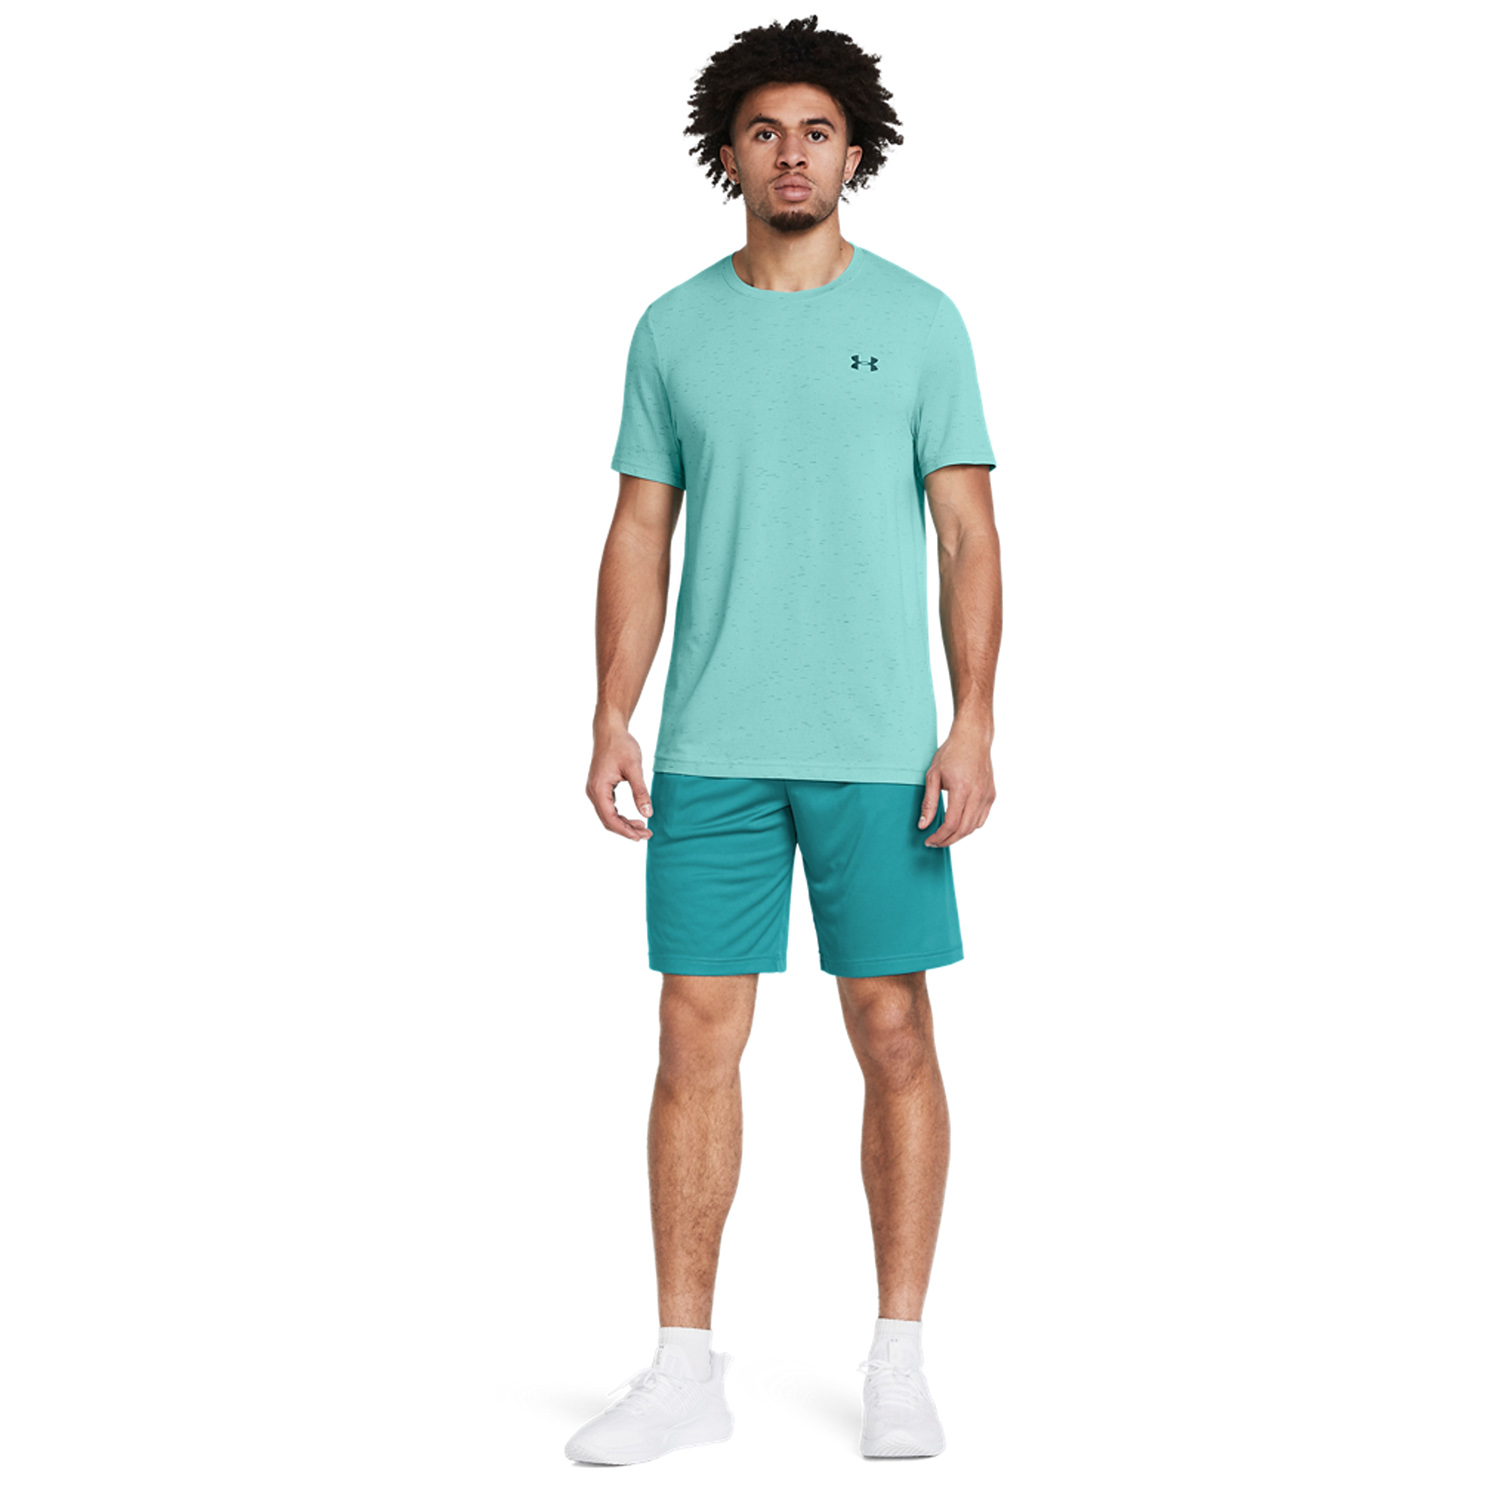 Under Armour Tech Graphic 10in Shorts - Circuit Teal/Black